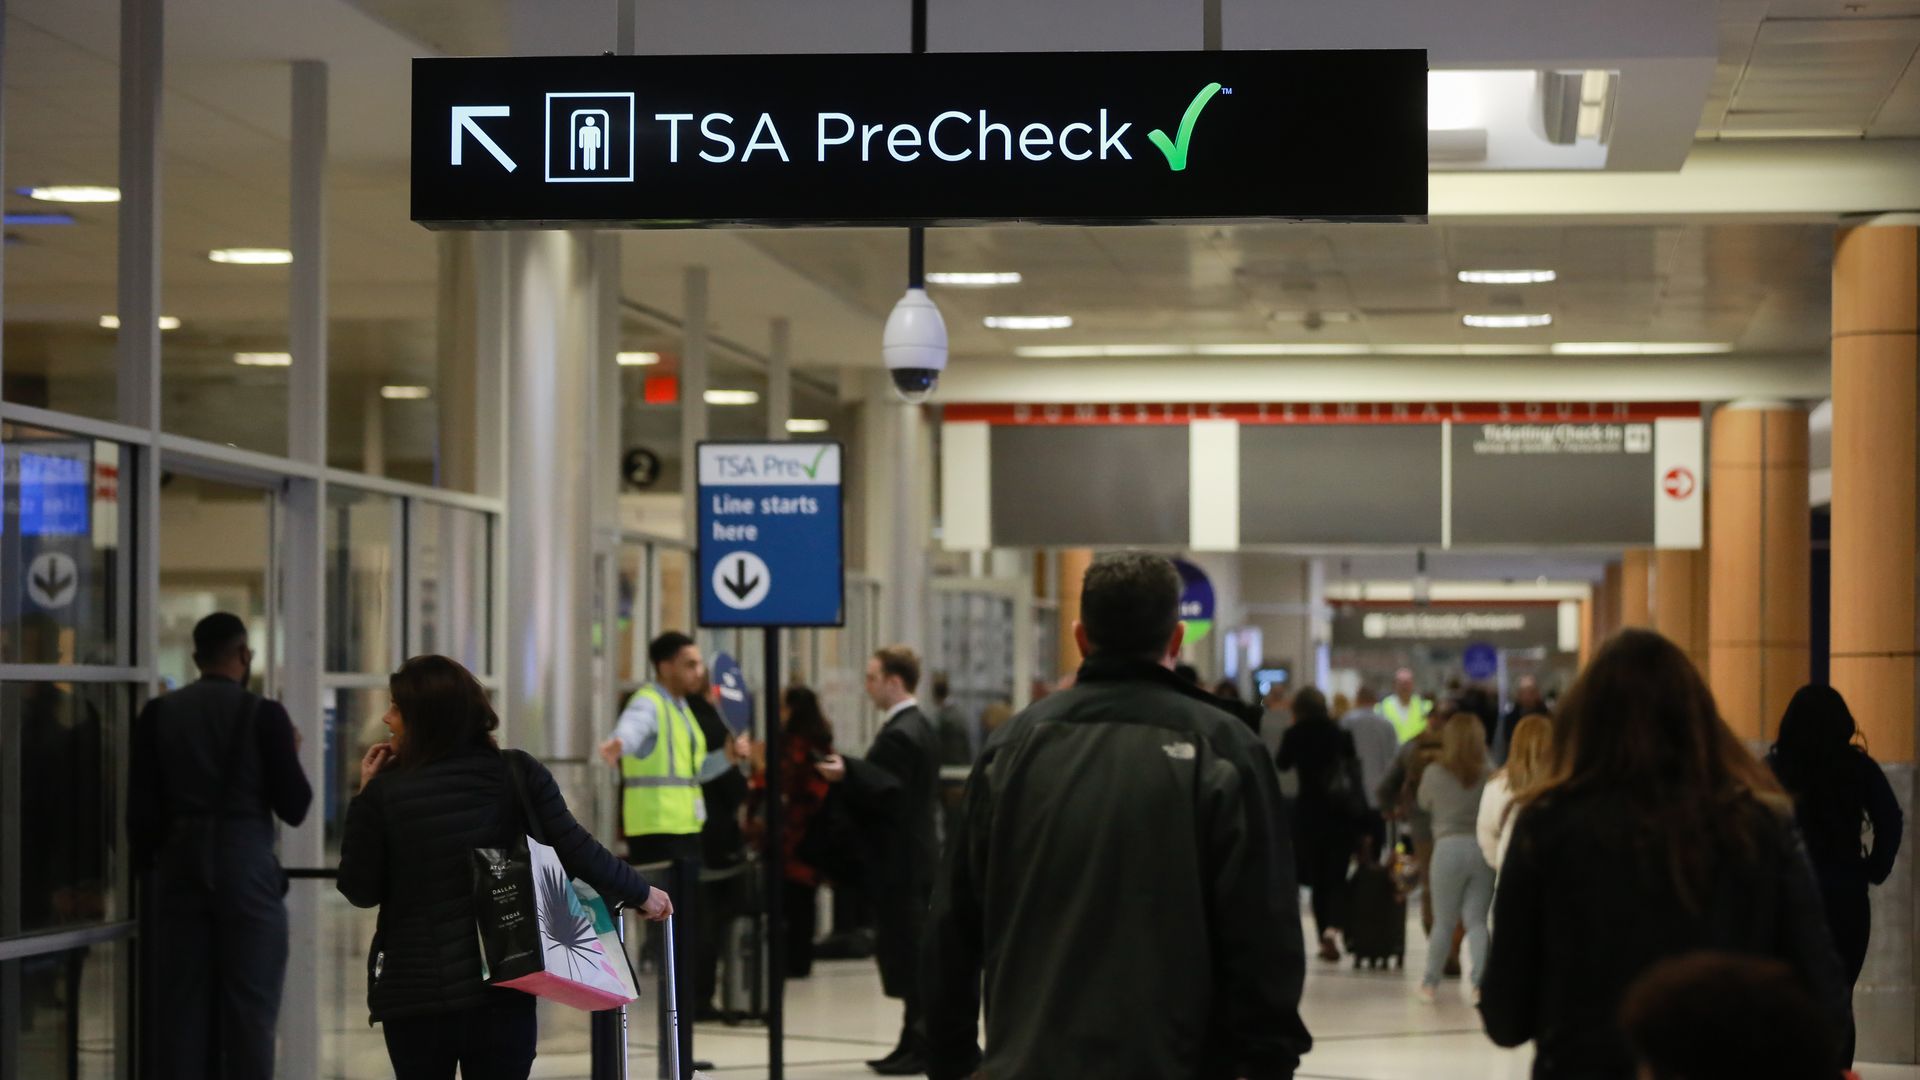 Photo of a sign that says "TSA PreCheck" in a hallway with passengers carrying suitcases